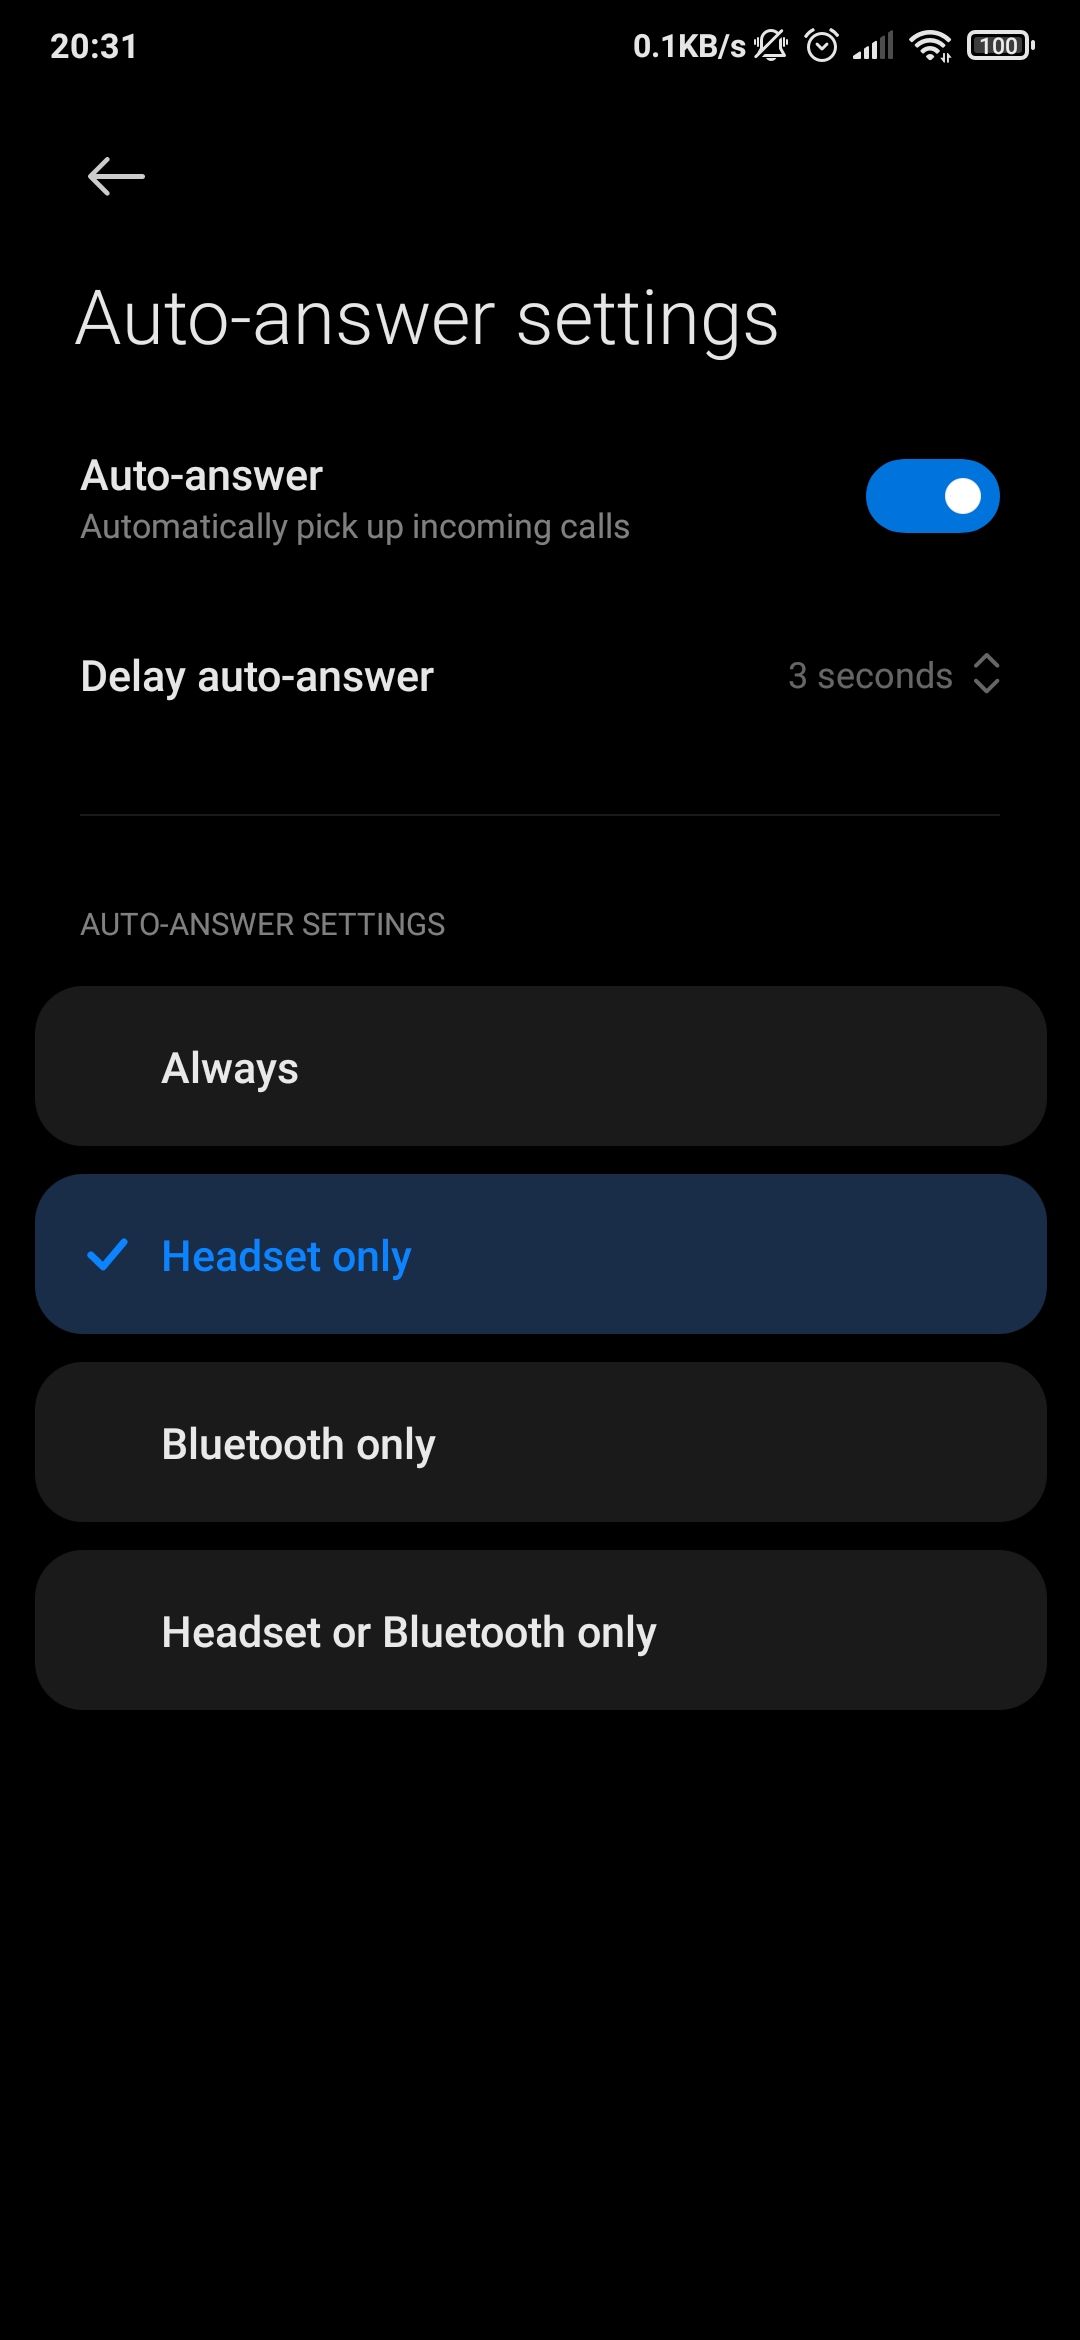 Auto-answer call settings in Google phone app -- more options